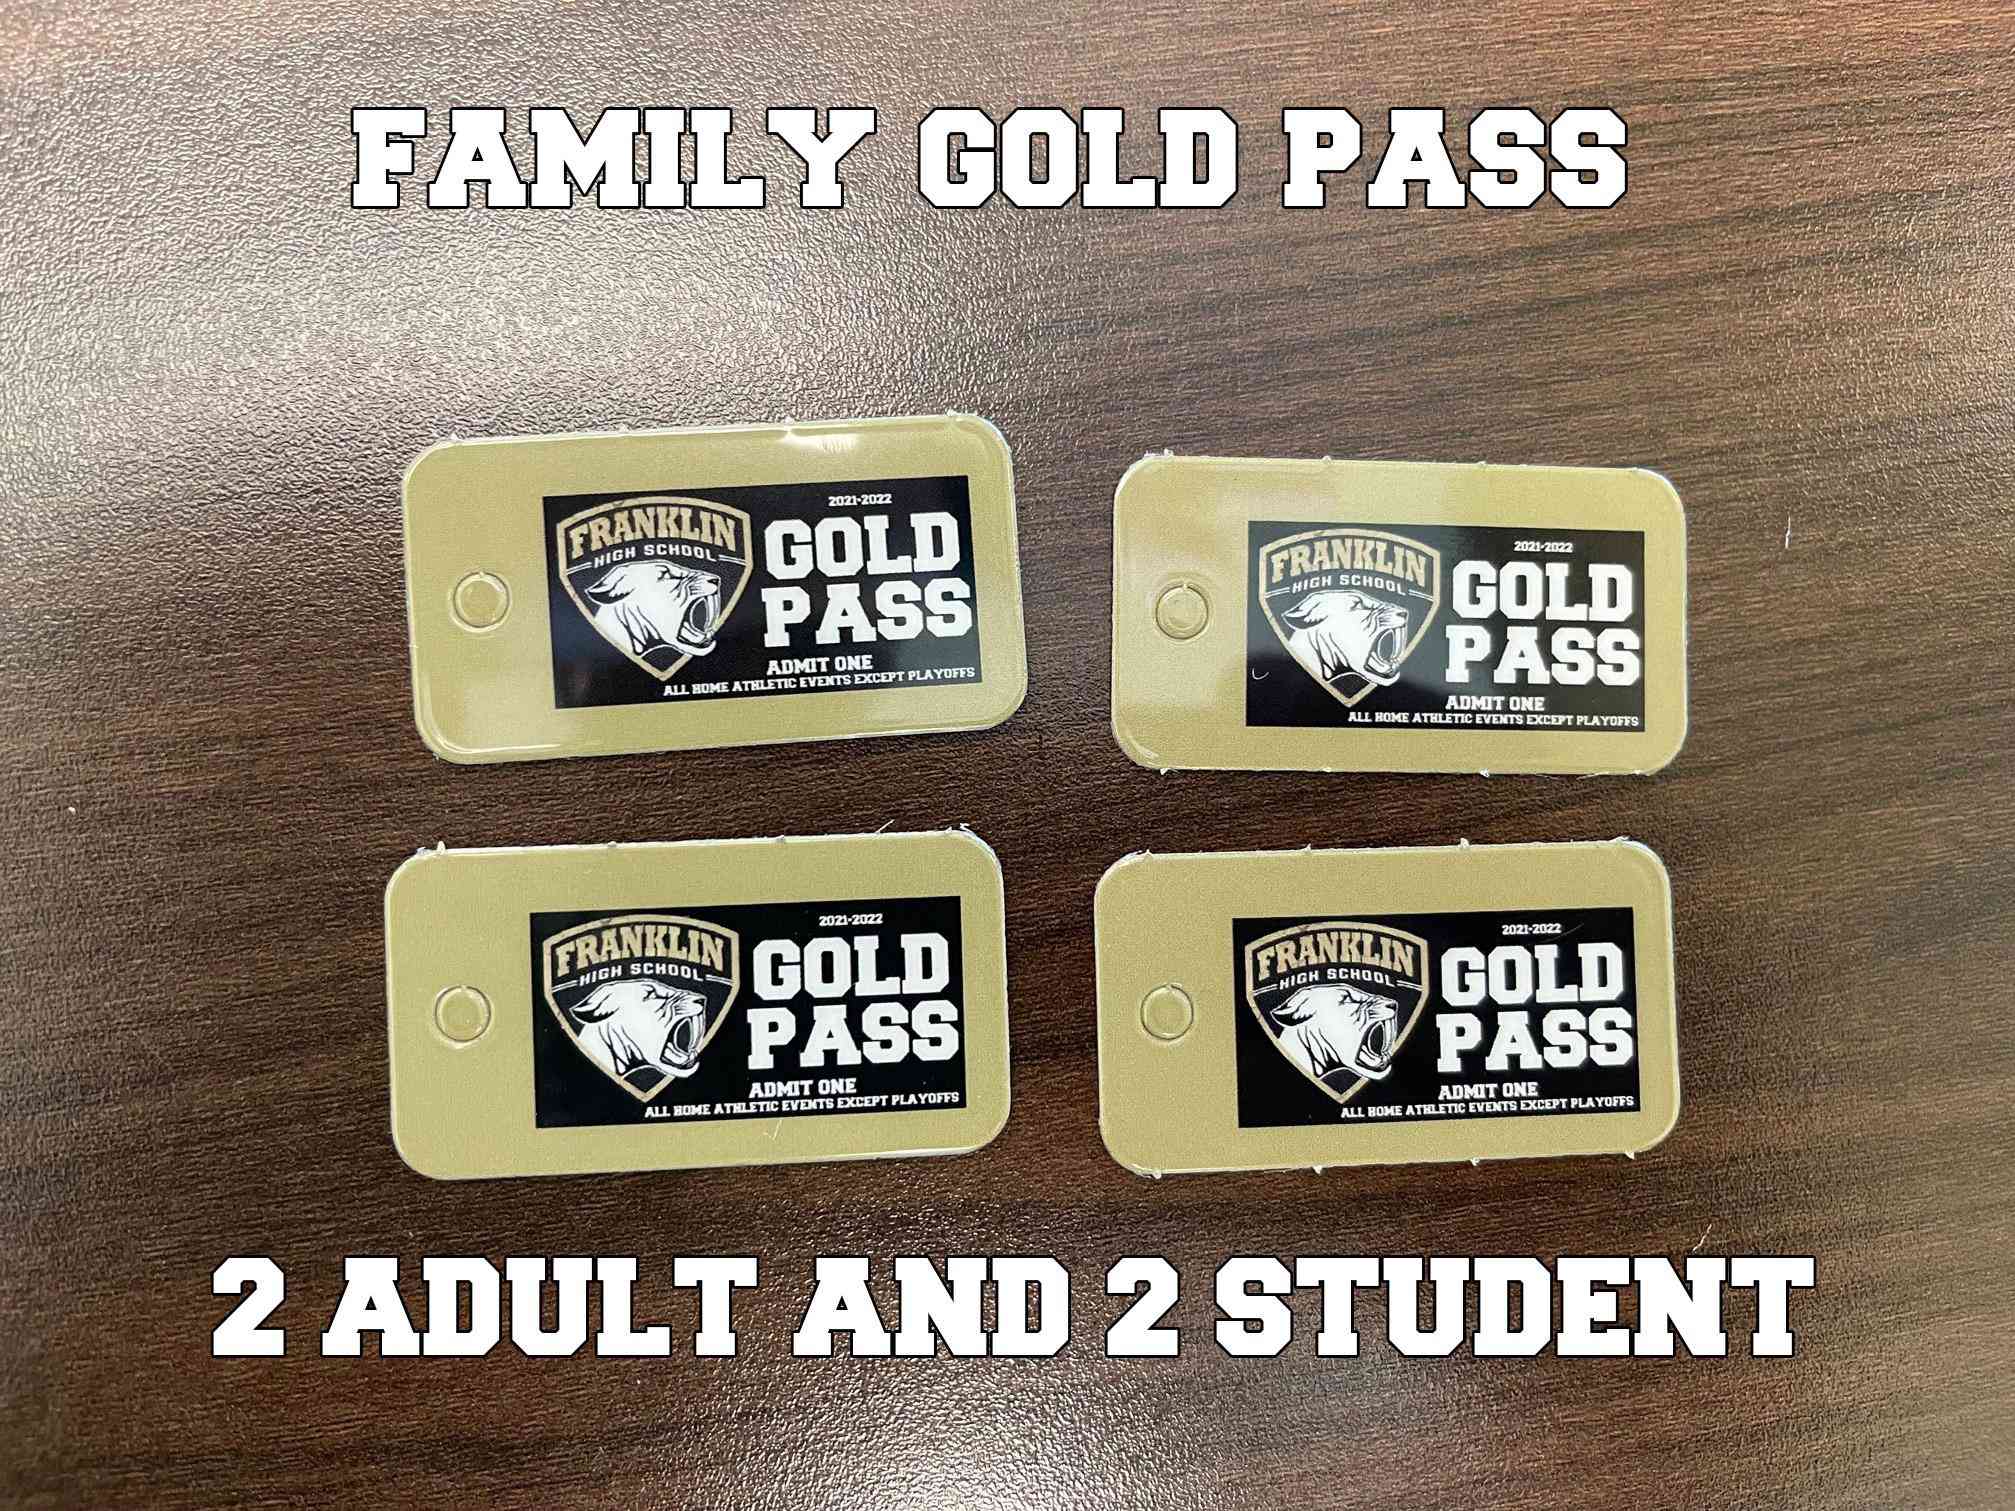 Family Gold Pass Image